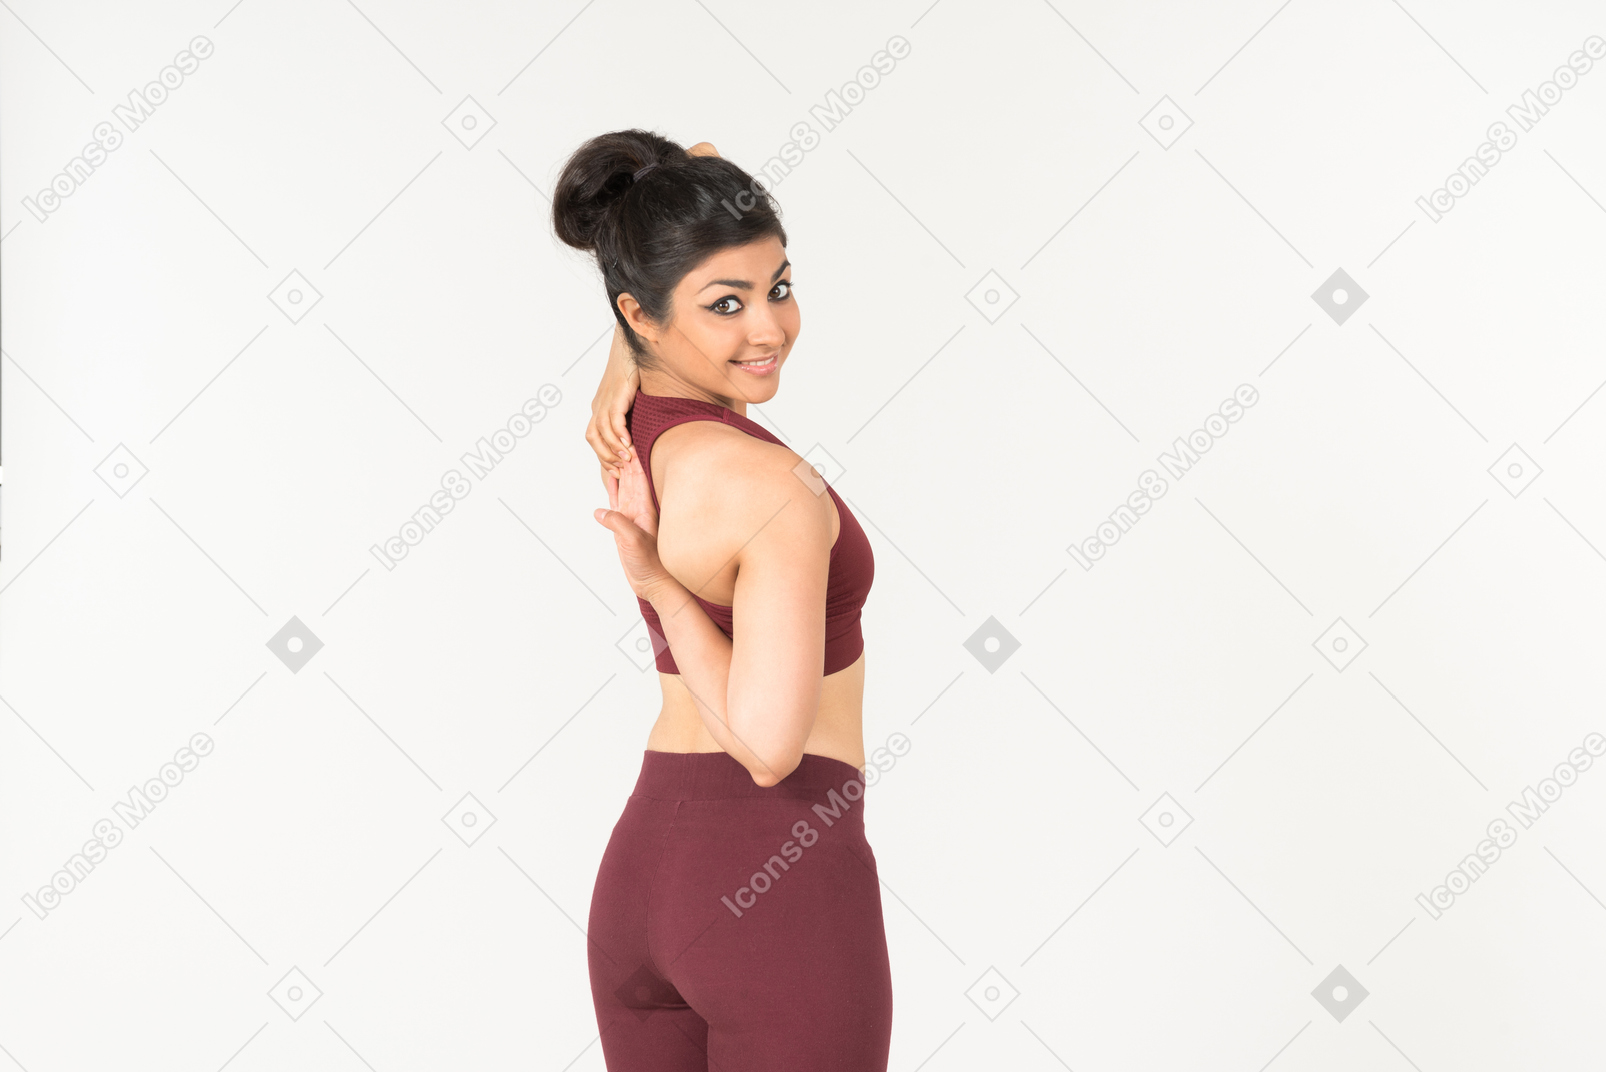 Young indian woman in sportswear holding hands crossed behind the back